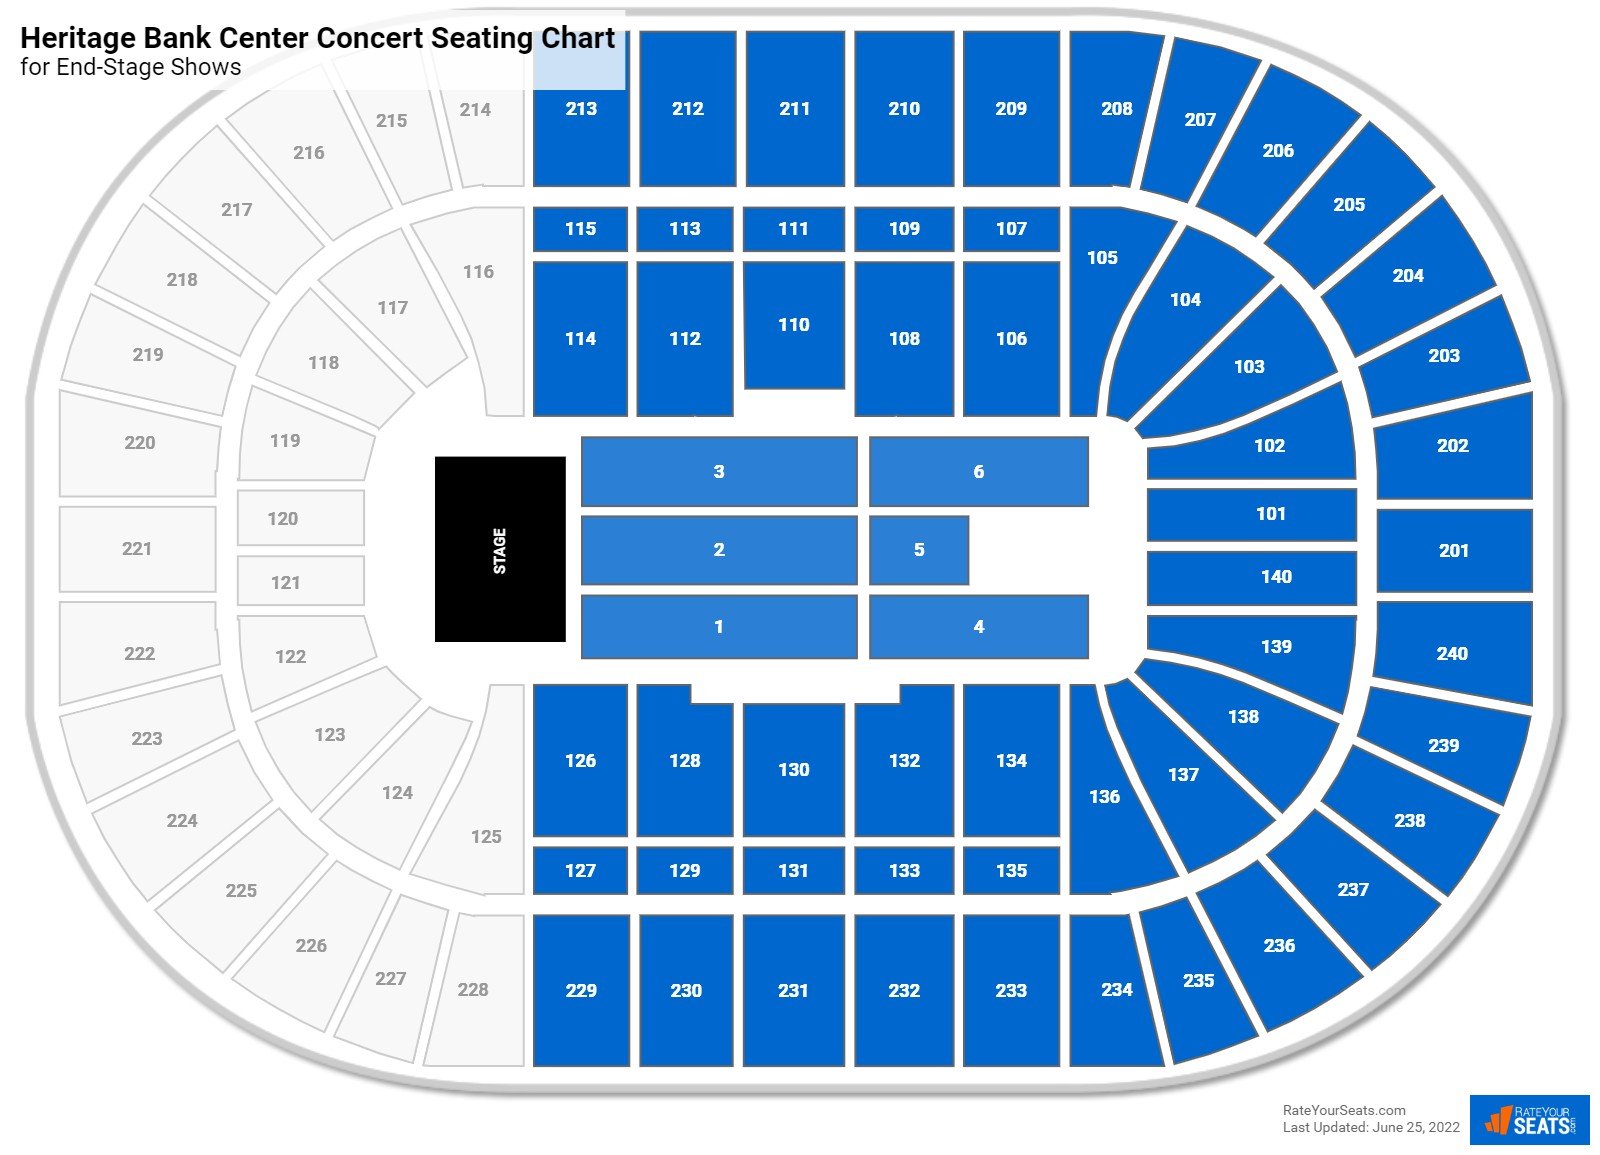 Heritage Bank Center Concert Seating Chart